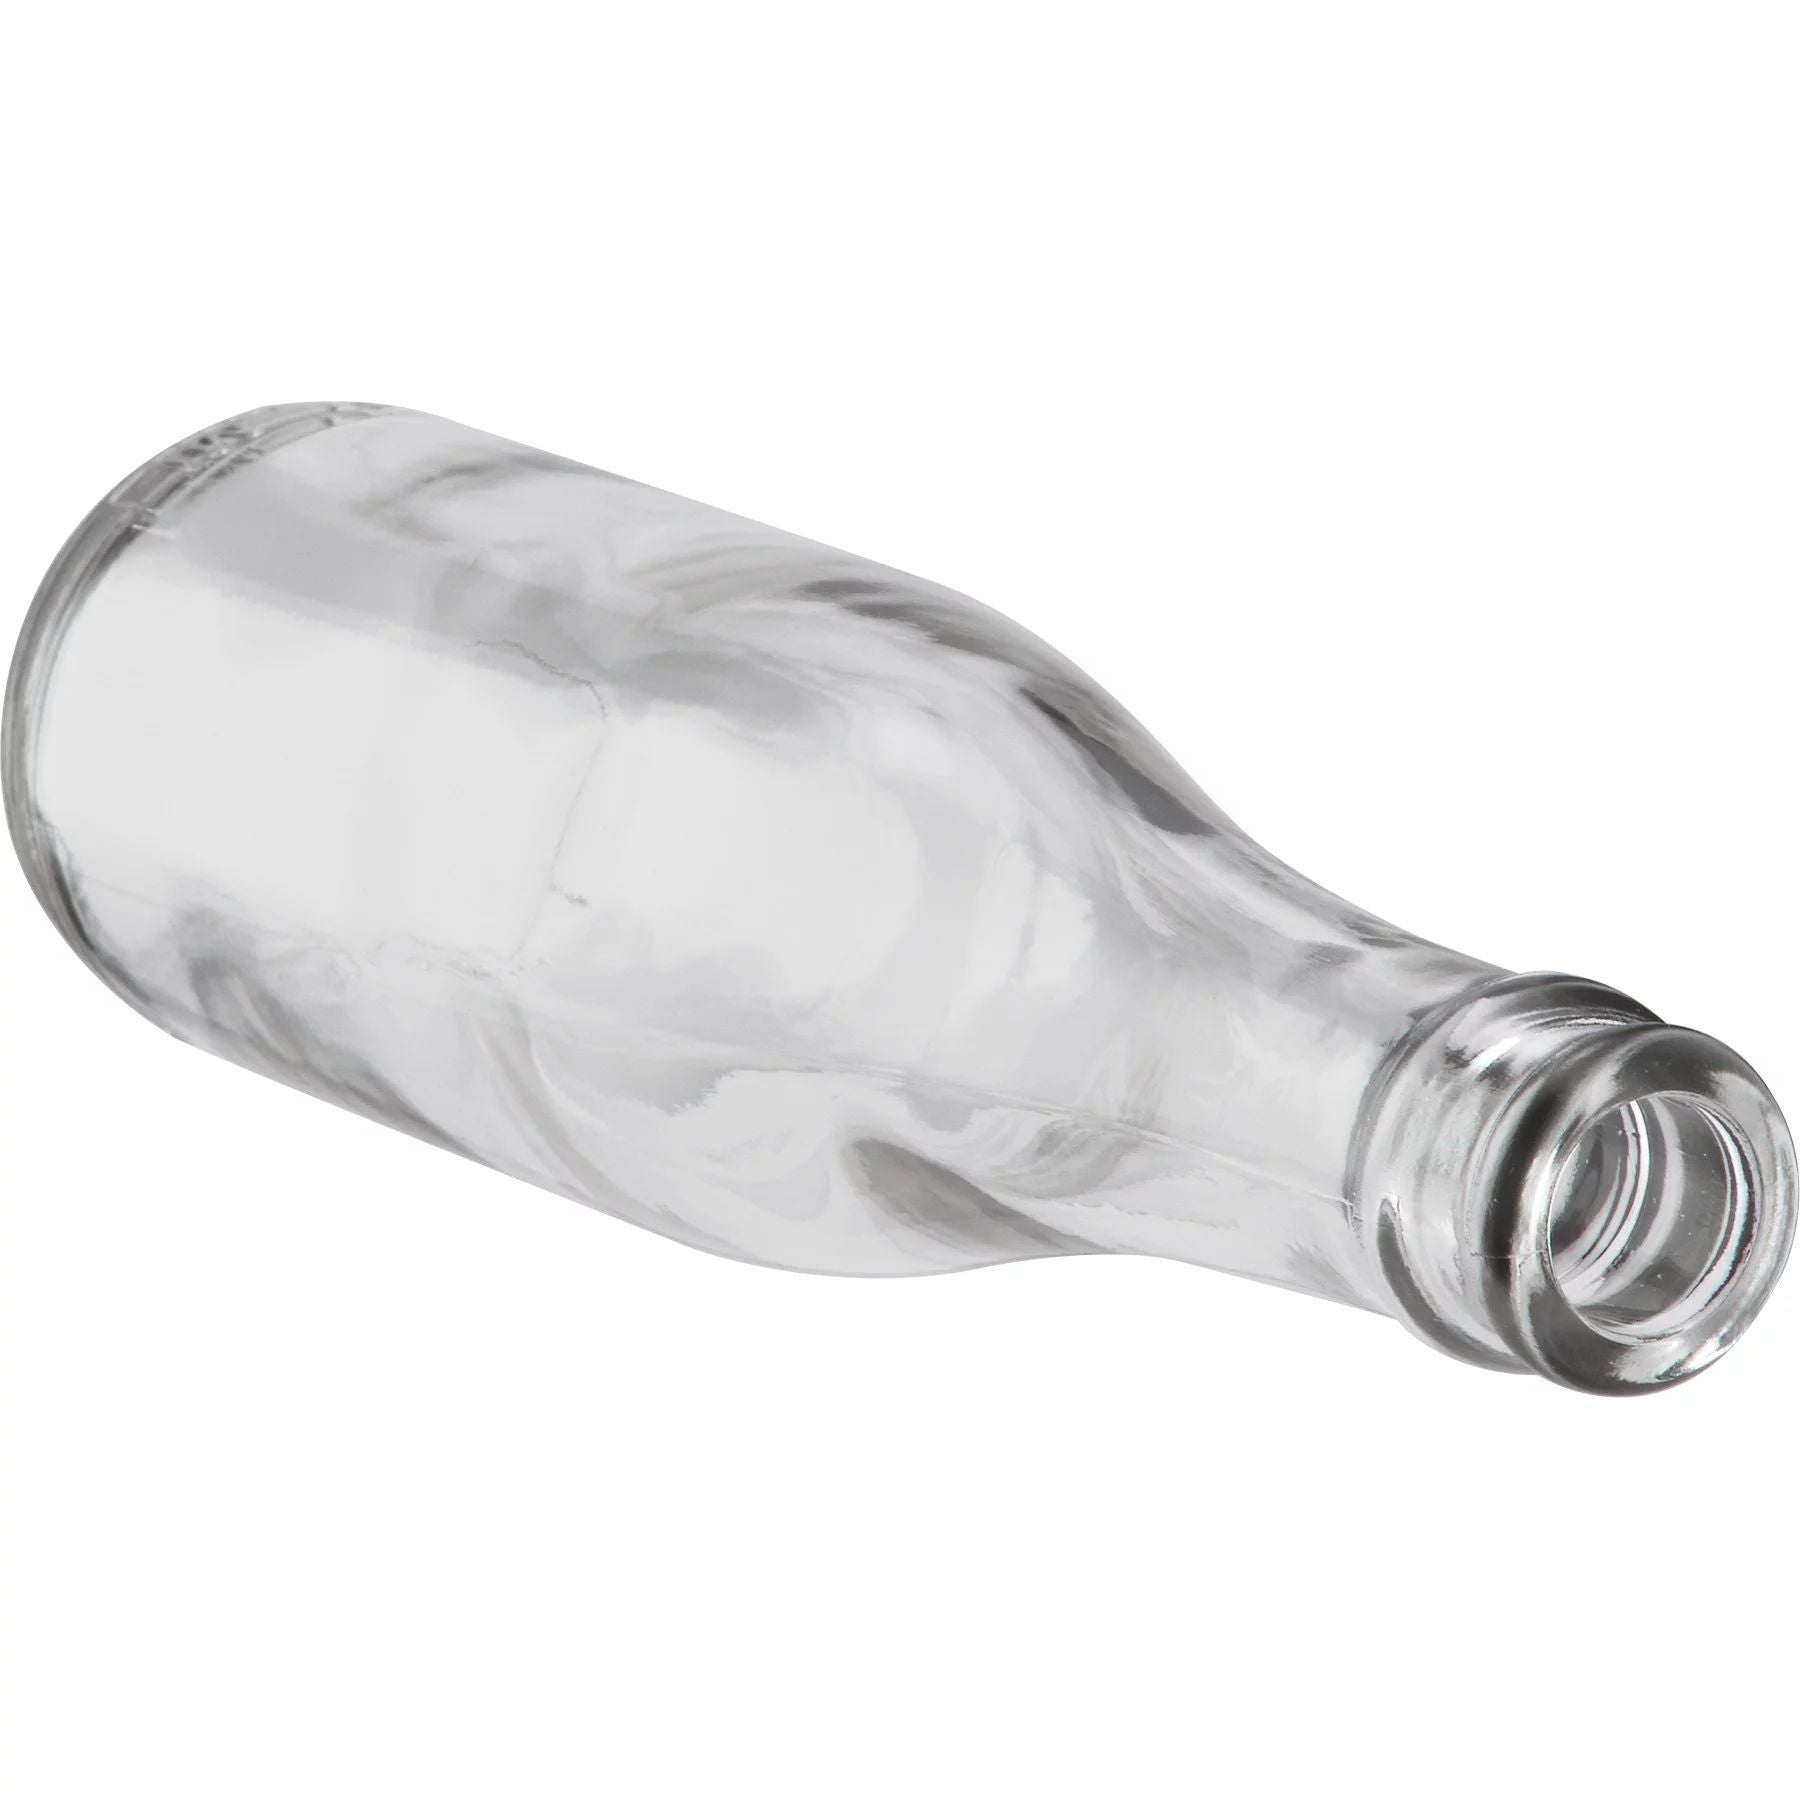 Champagne Bottles, Mini - 187 ml, Clear - Case of 24